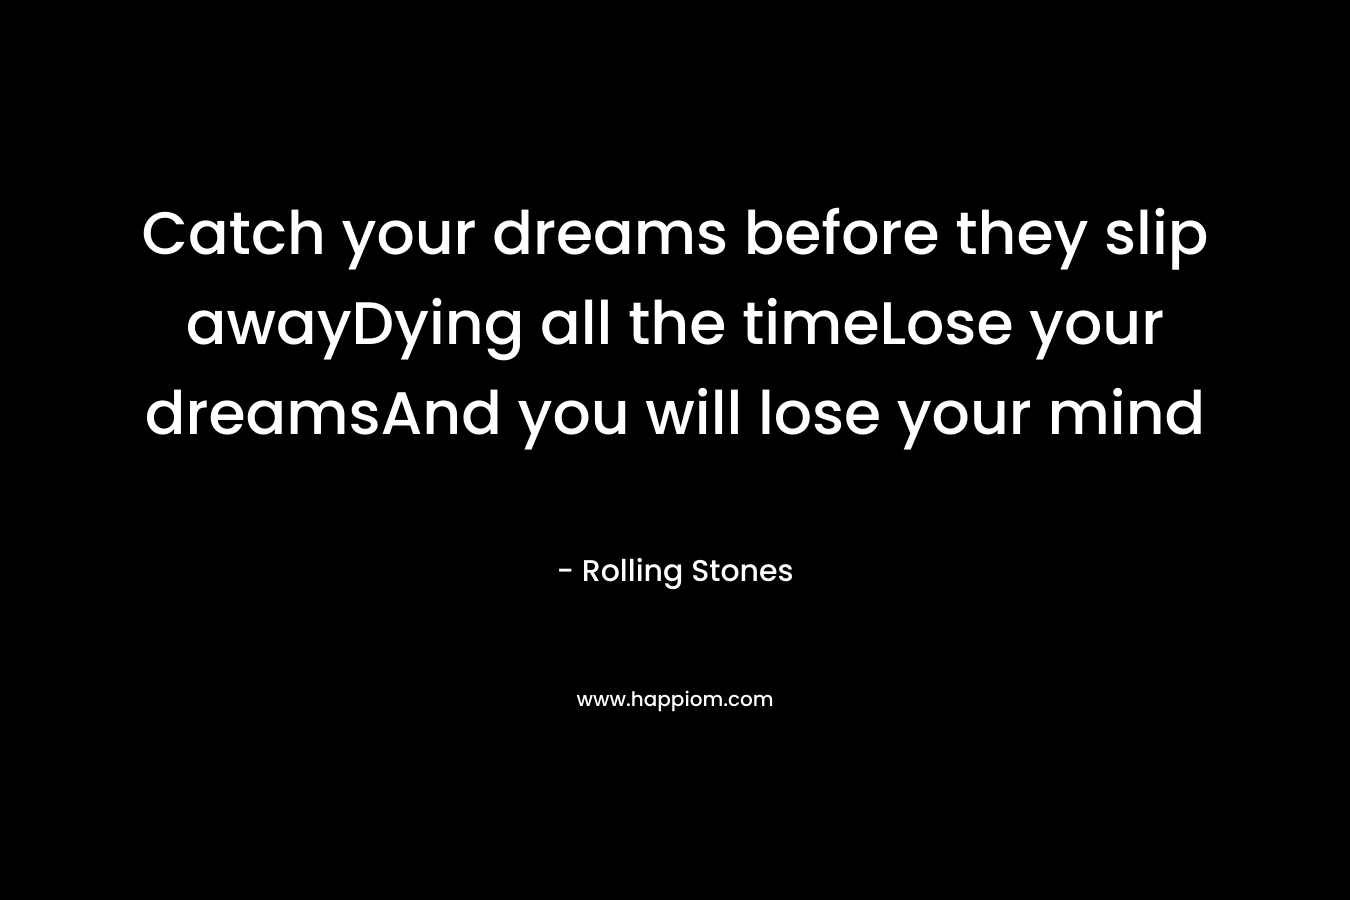 Catch your dreams before they slip awayDying all the timeLose your dreamsAnd you will lose your mind